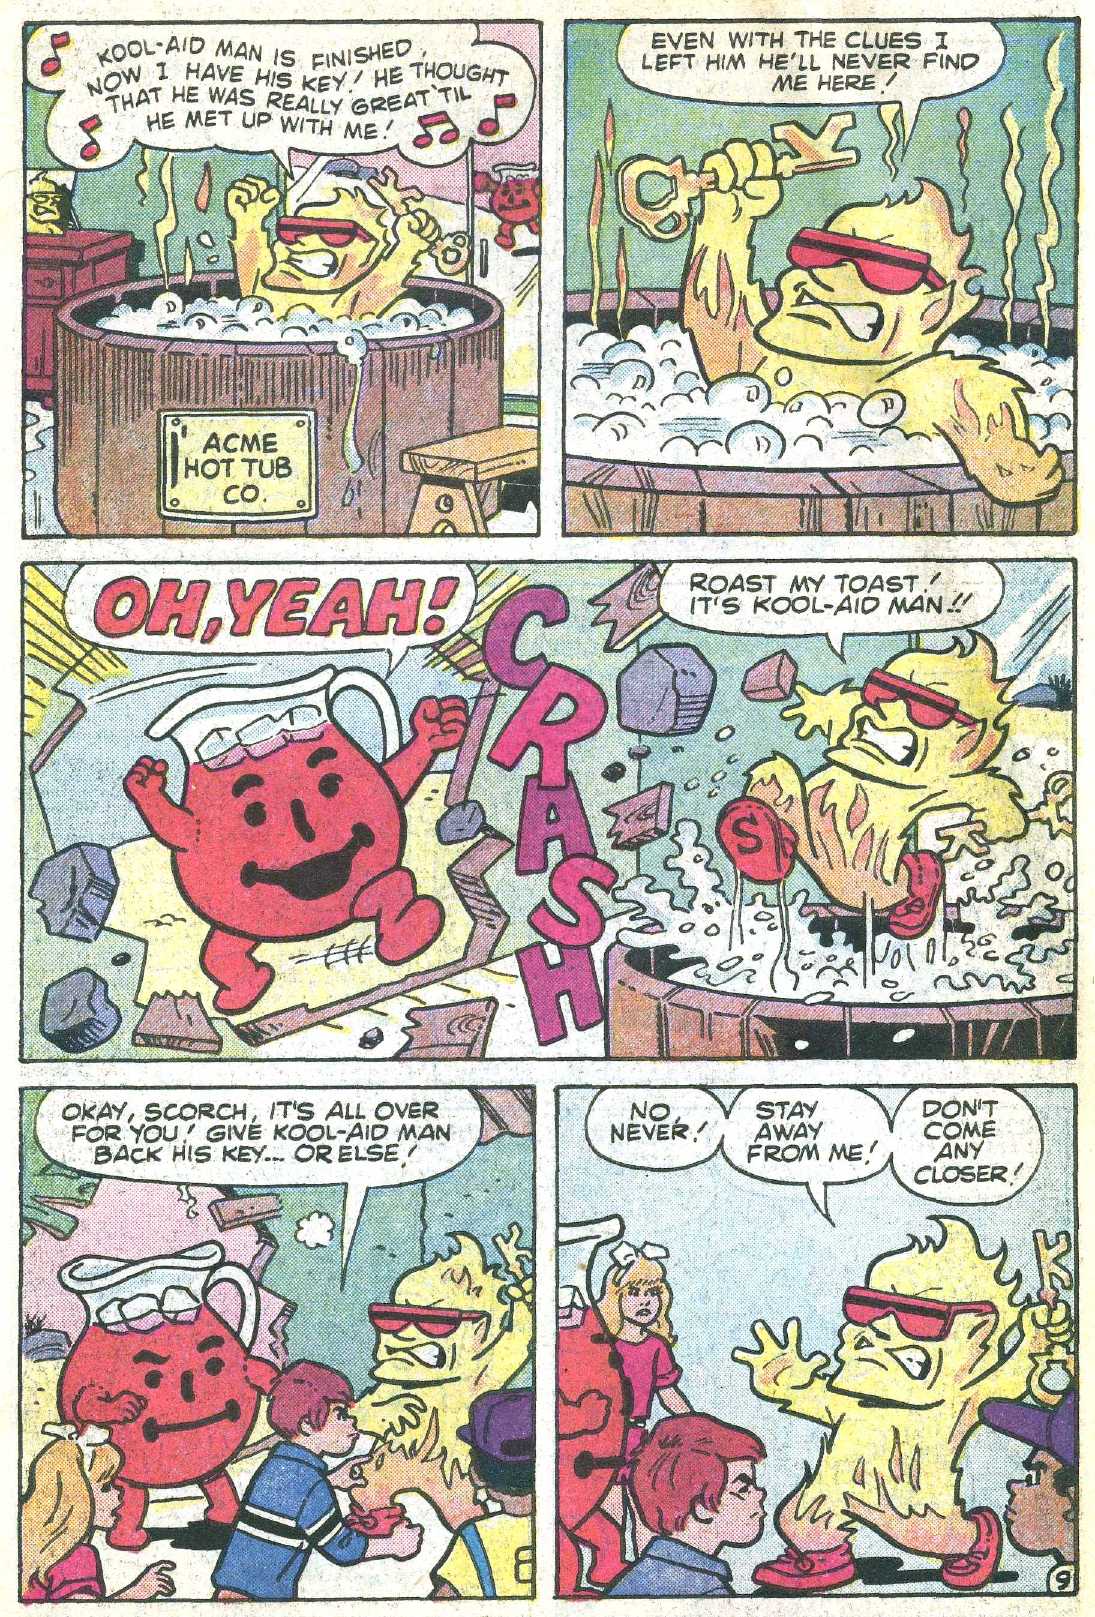 Read online The Adventures of Kool-Aid Man comic -  Issue #4 - 11